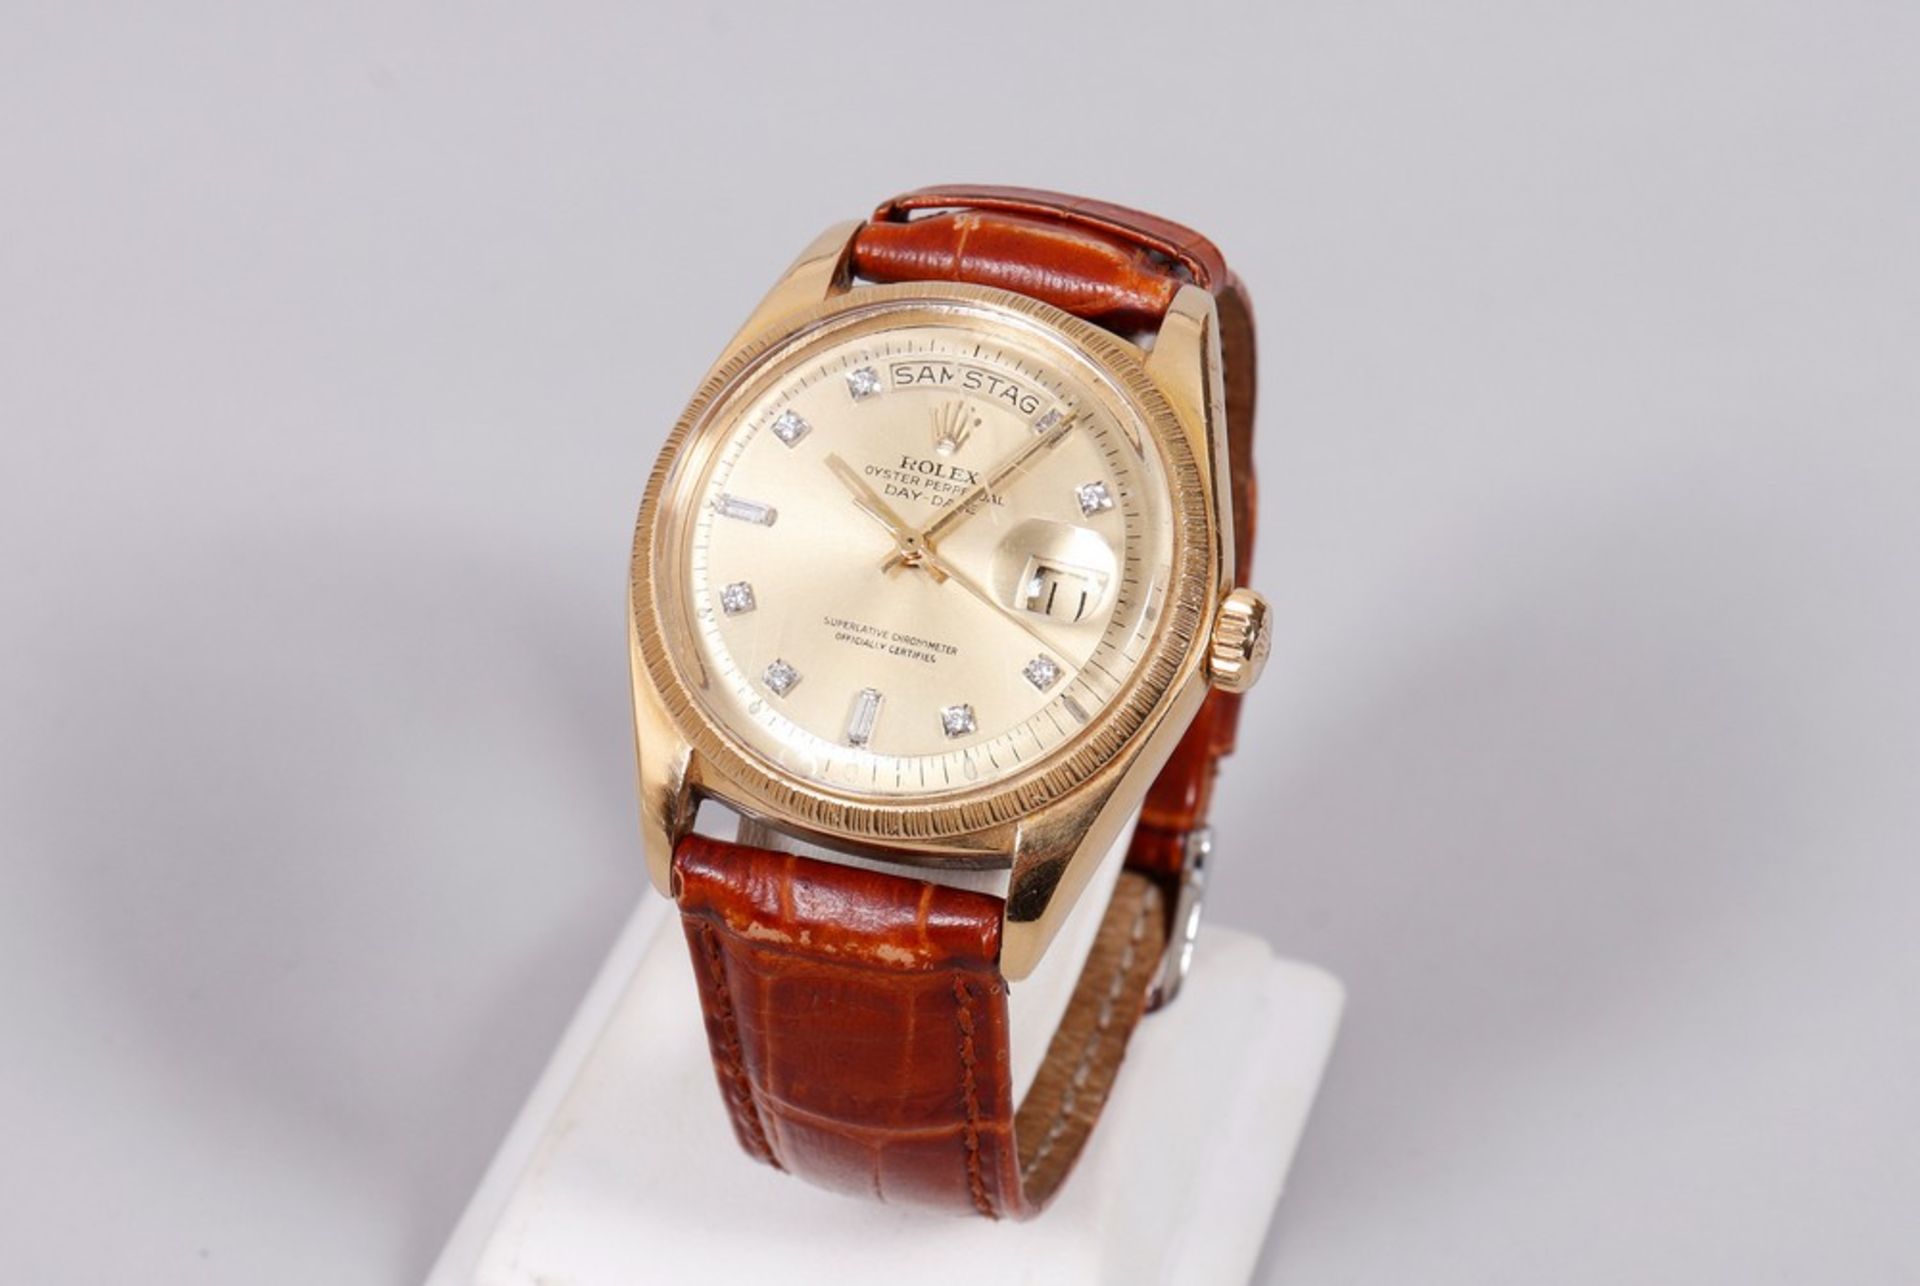 Rolex Day Date, 750 gold, reference 1807, pie pan dial